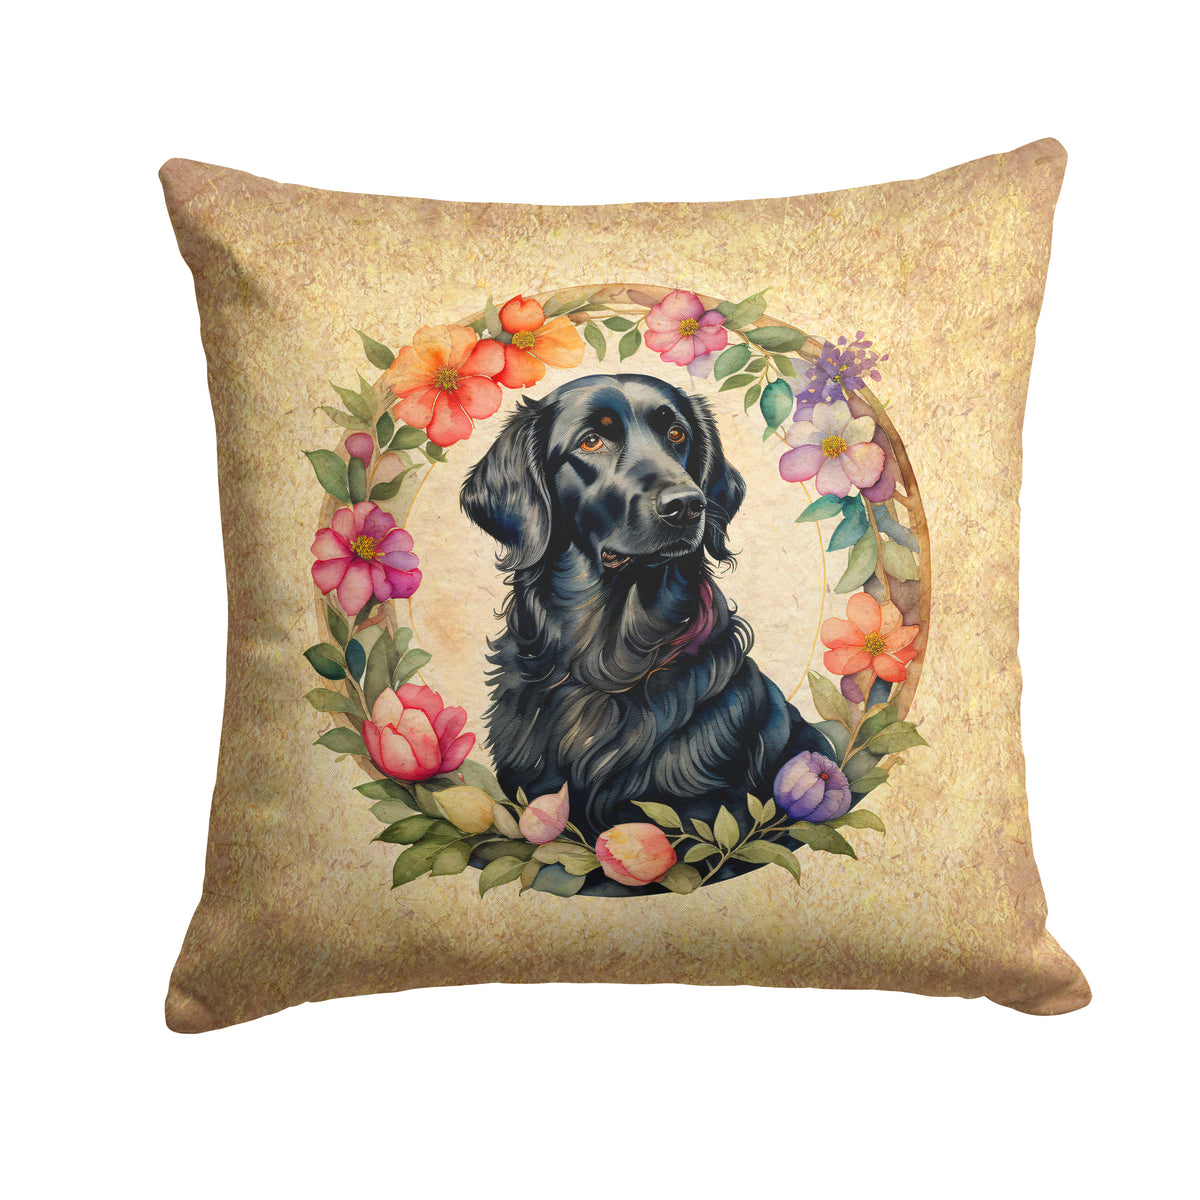 Buy this Flat-Coated Retriever and Flowers Fabric Decorative Pillow